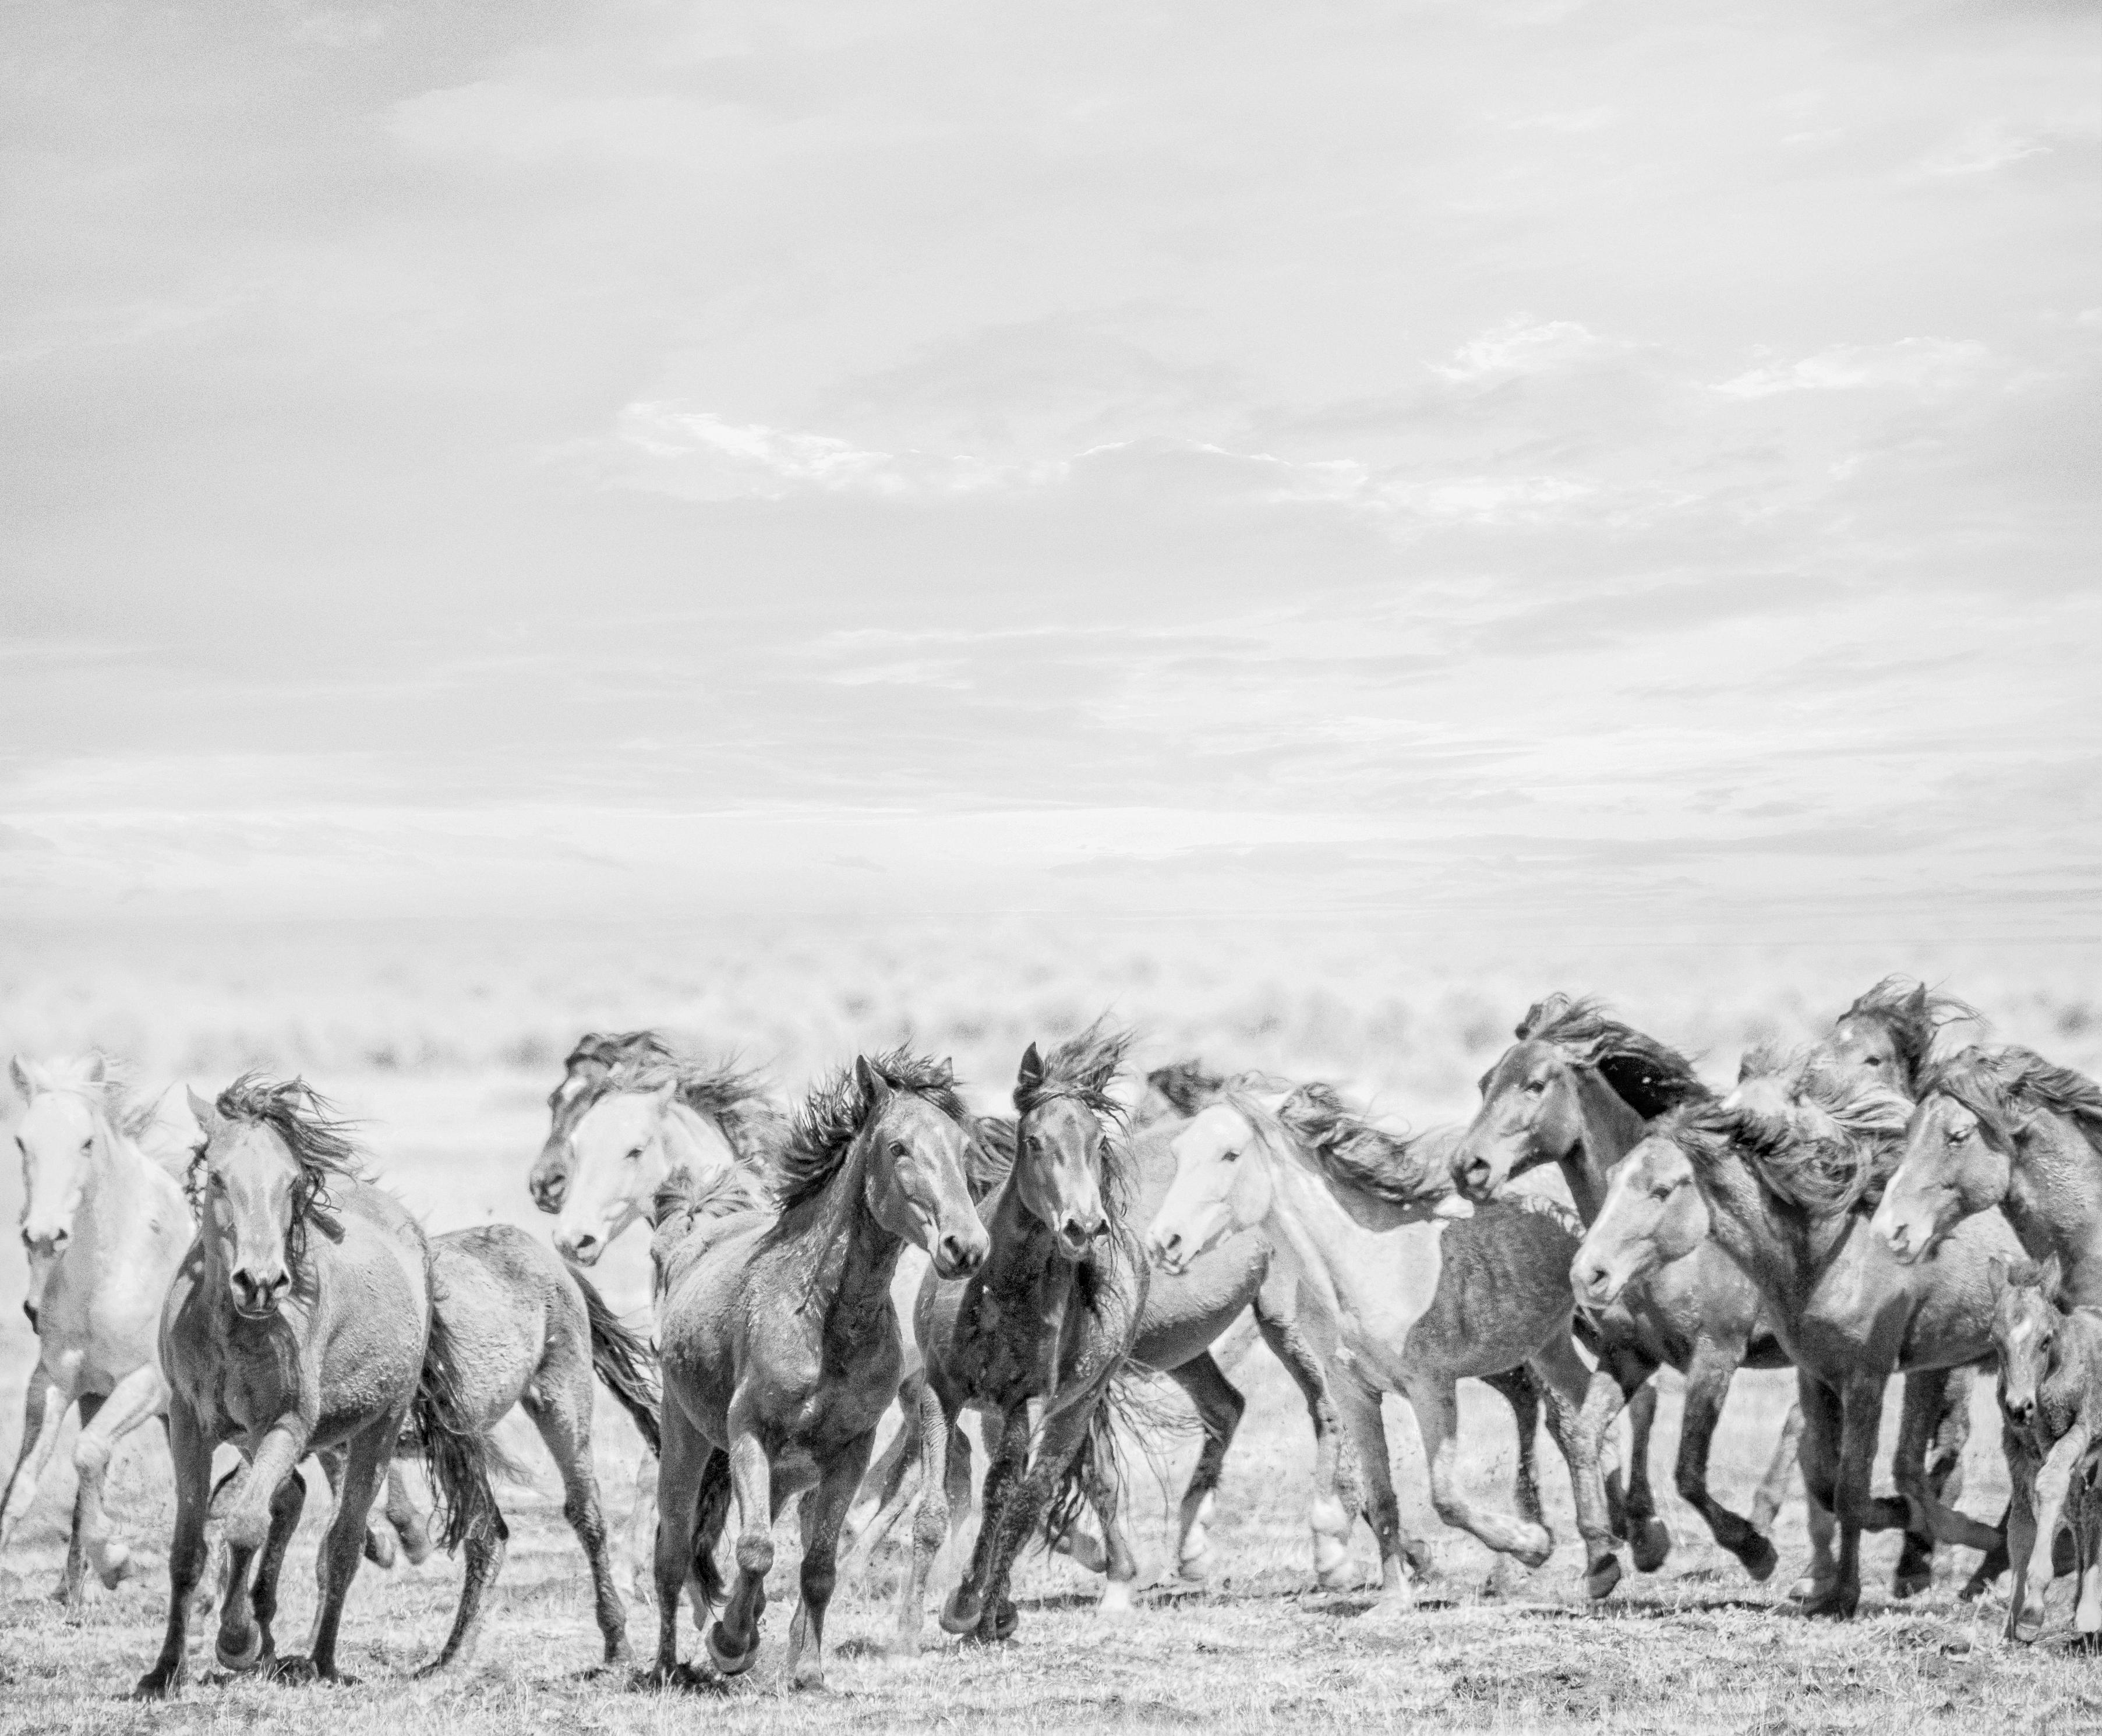 Shane Russeck Animal Print - Go West 45x60 Black & White Photography Wild Horses Photograph Mustangs Unsigned